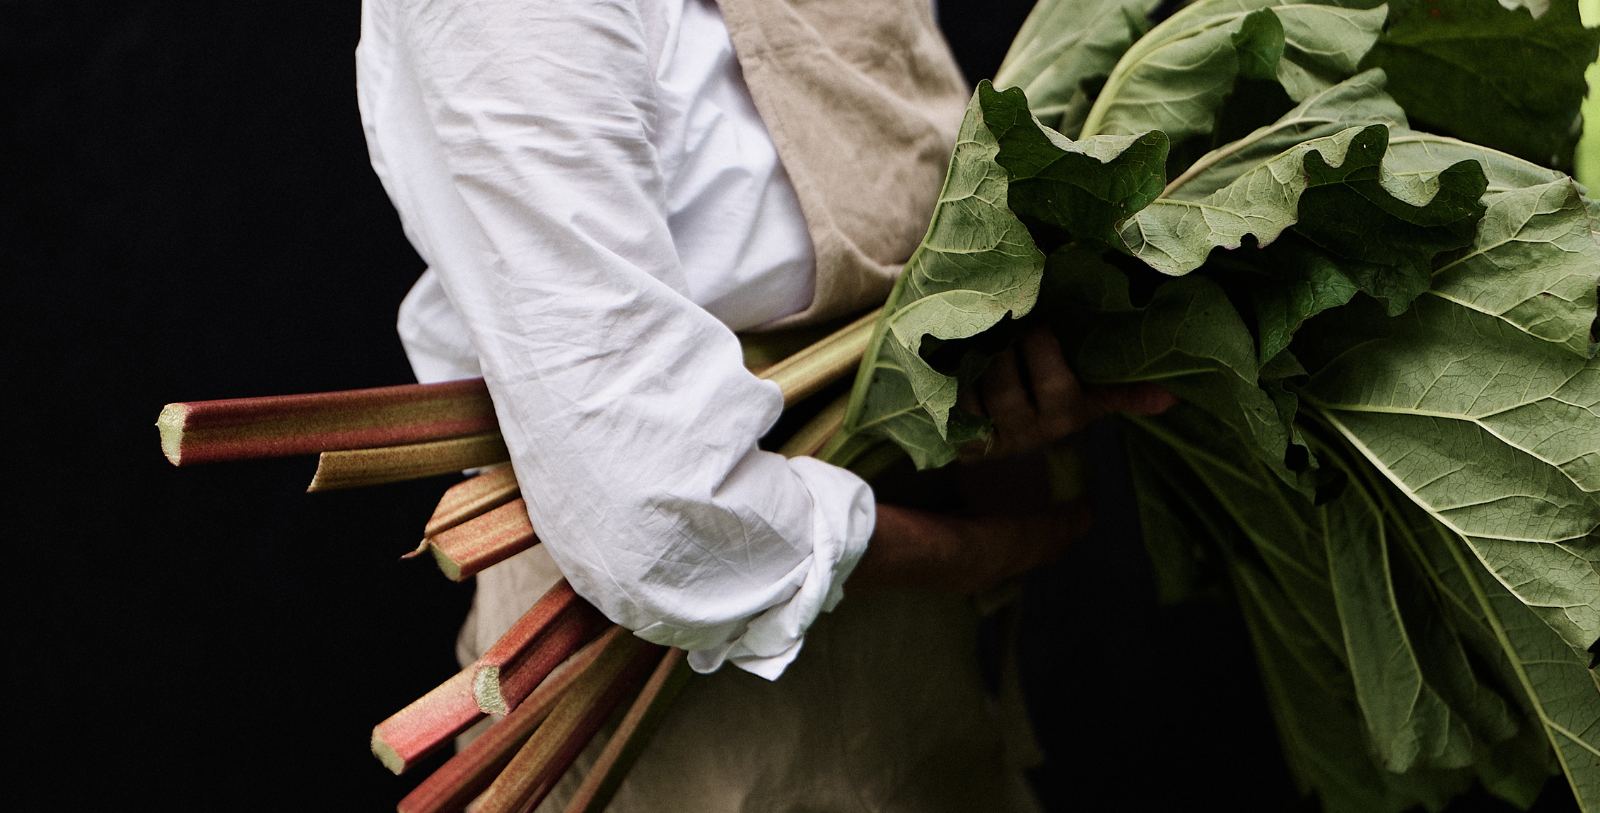 Taste the freshness of hand-picked native fruits and vegetables directly from the grounds of Hoel Gård.